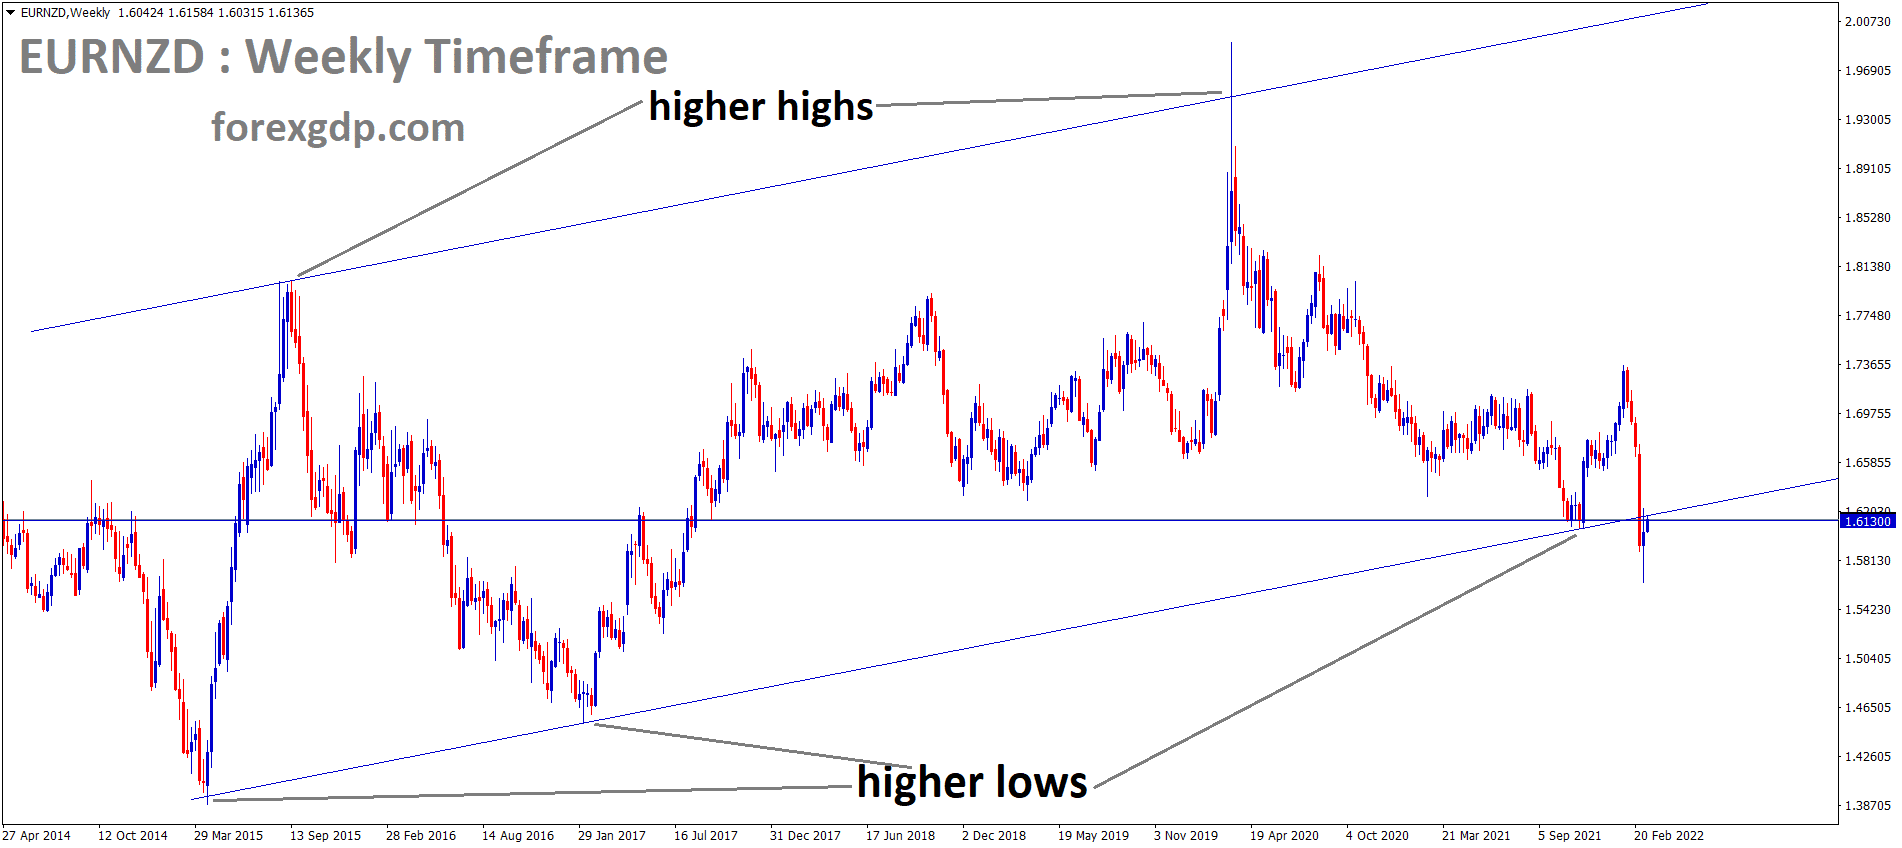 EURNZD is moving in an Ascending channel and the market has rebounded from the higher low area of the pattern